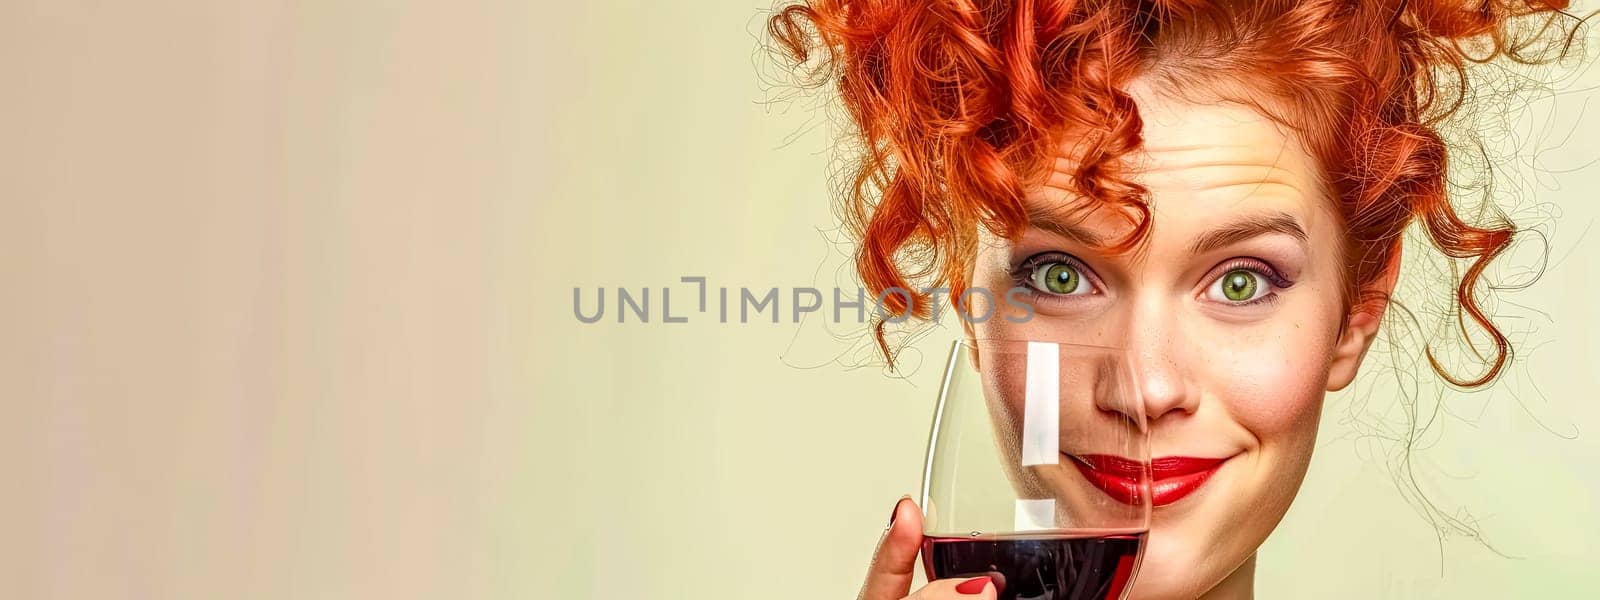 A fictional character with red hair is holding a glass of wine, showcasing a sly smile. Her lips are adorned with lipstick, adding to her captivating gesture